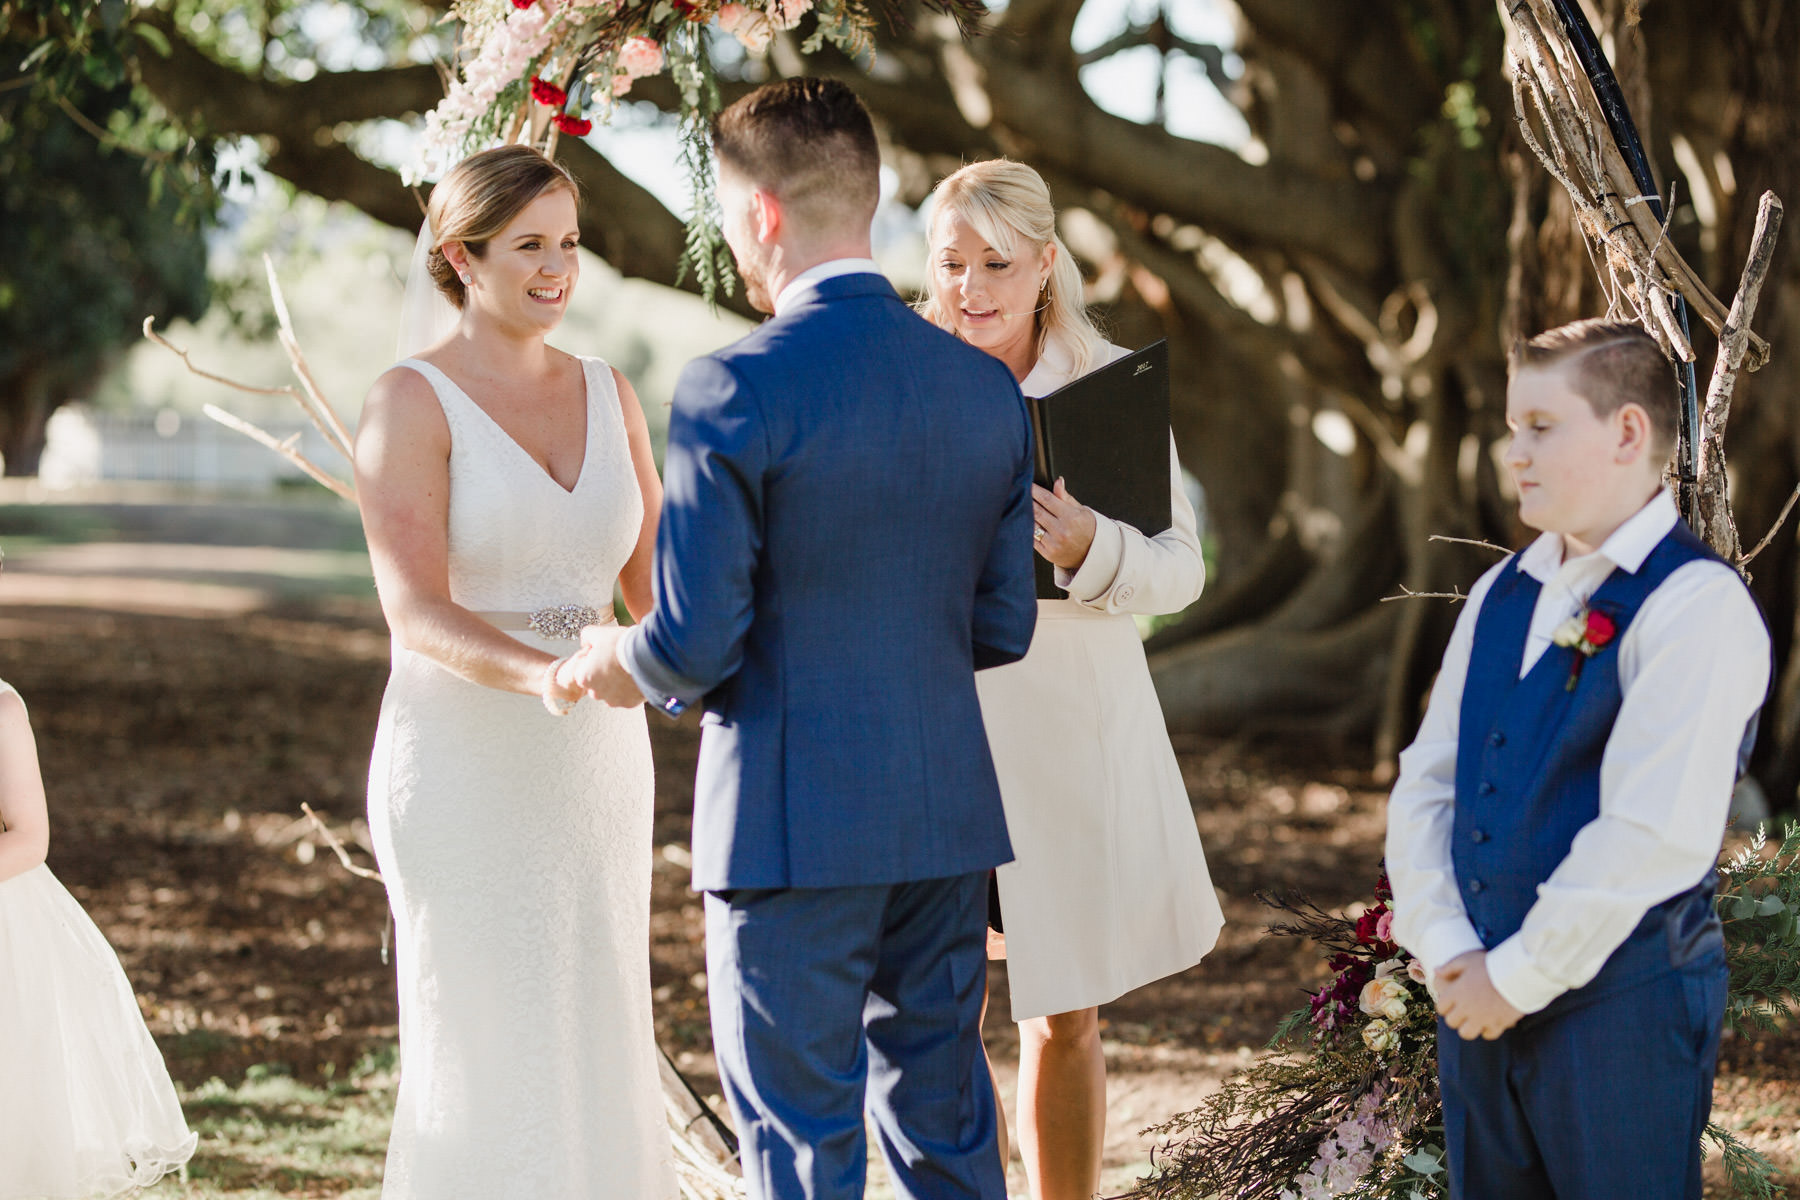 058Hunter Valley Wedding Photographers Bryce Noone Photography at Tocal Homestead Wedding Venue.jpg